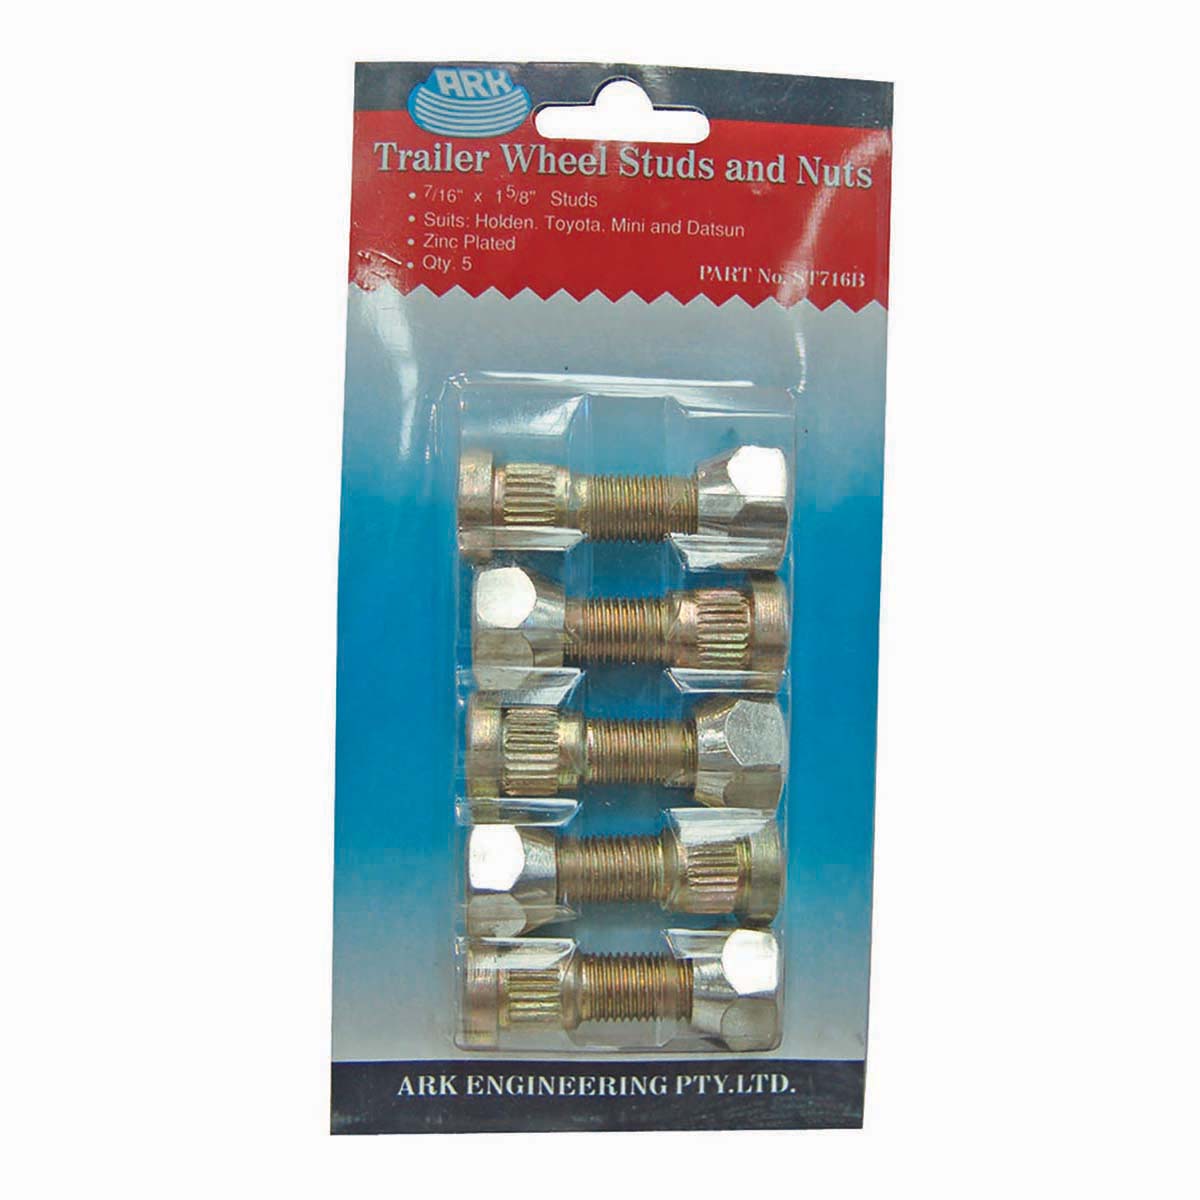 ARK Trailer Wheel Studs and Nuts 7/16in x 1 5/8in 5 Pack